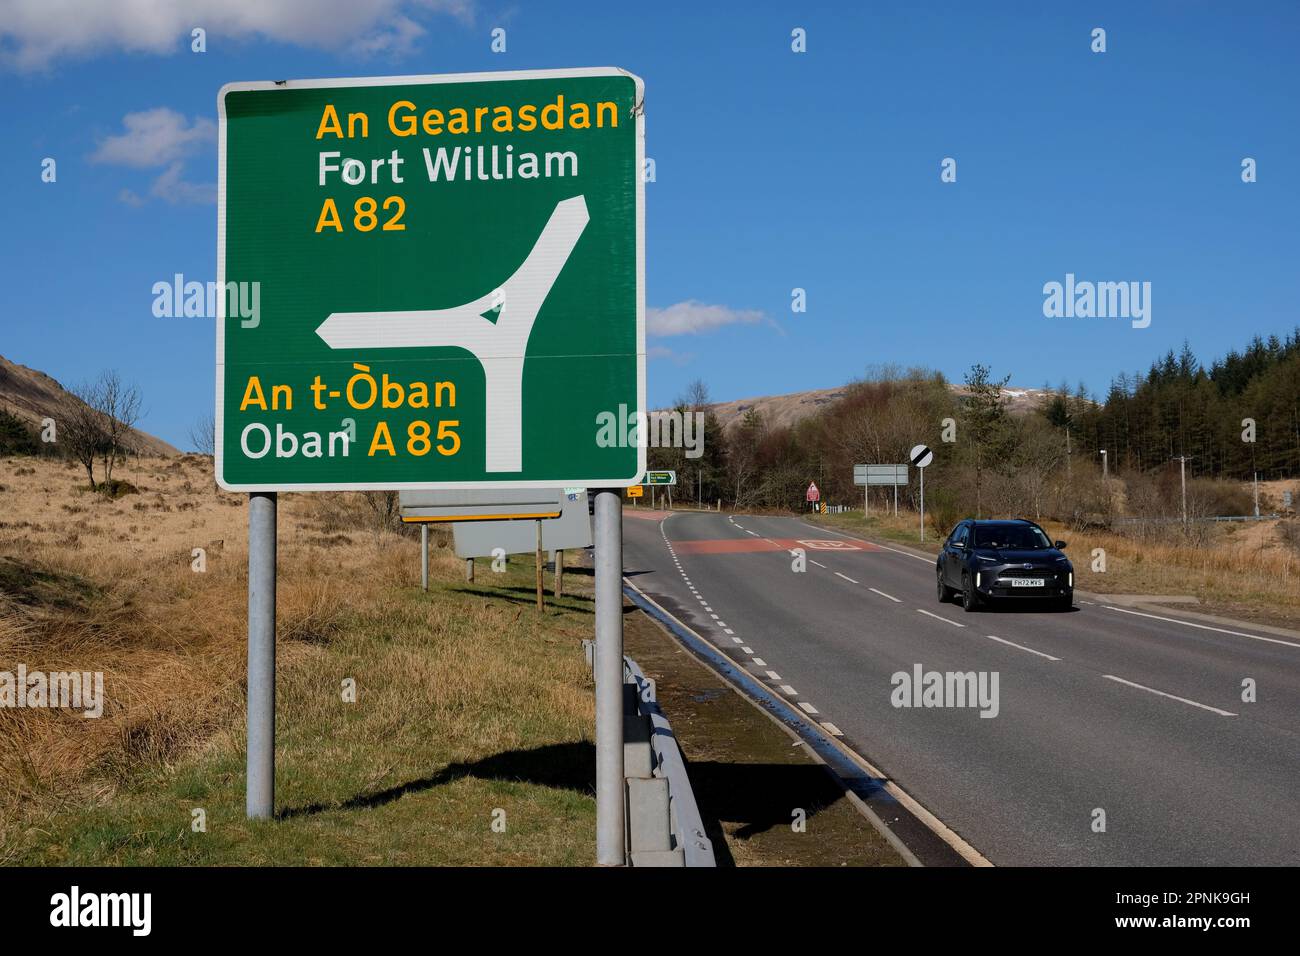 Clear blue skies and bright sunshine at Tyndrum, seen at the junction for the A82 road to Fort William and the A85 road to Oban, Tyndrum, Scotland Stock Photo